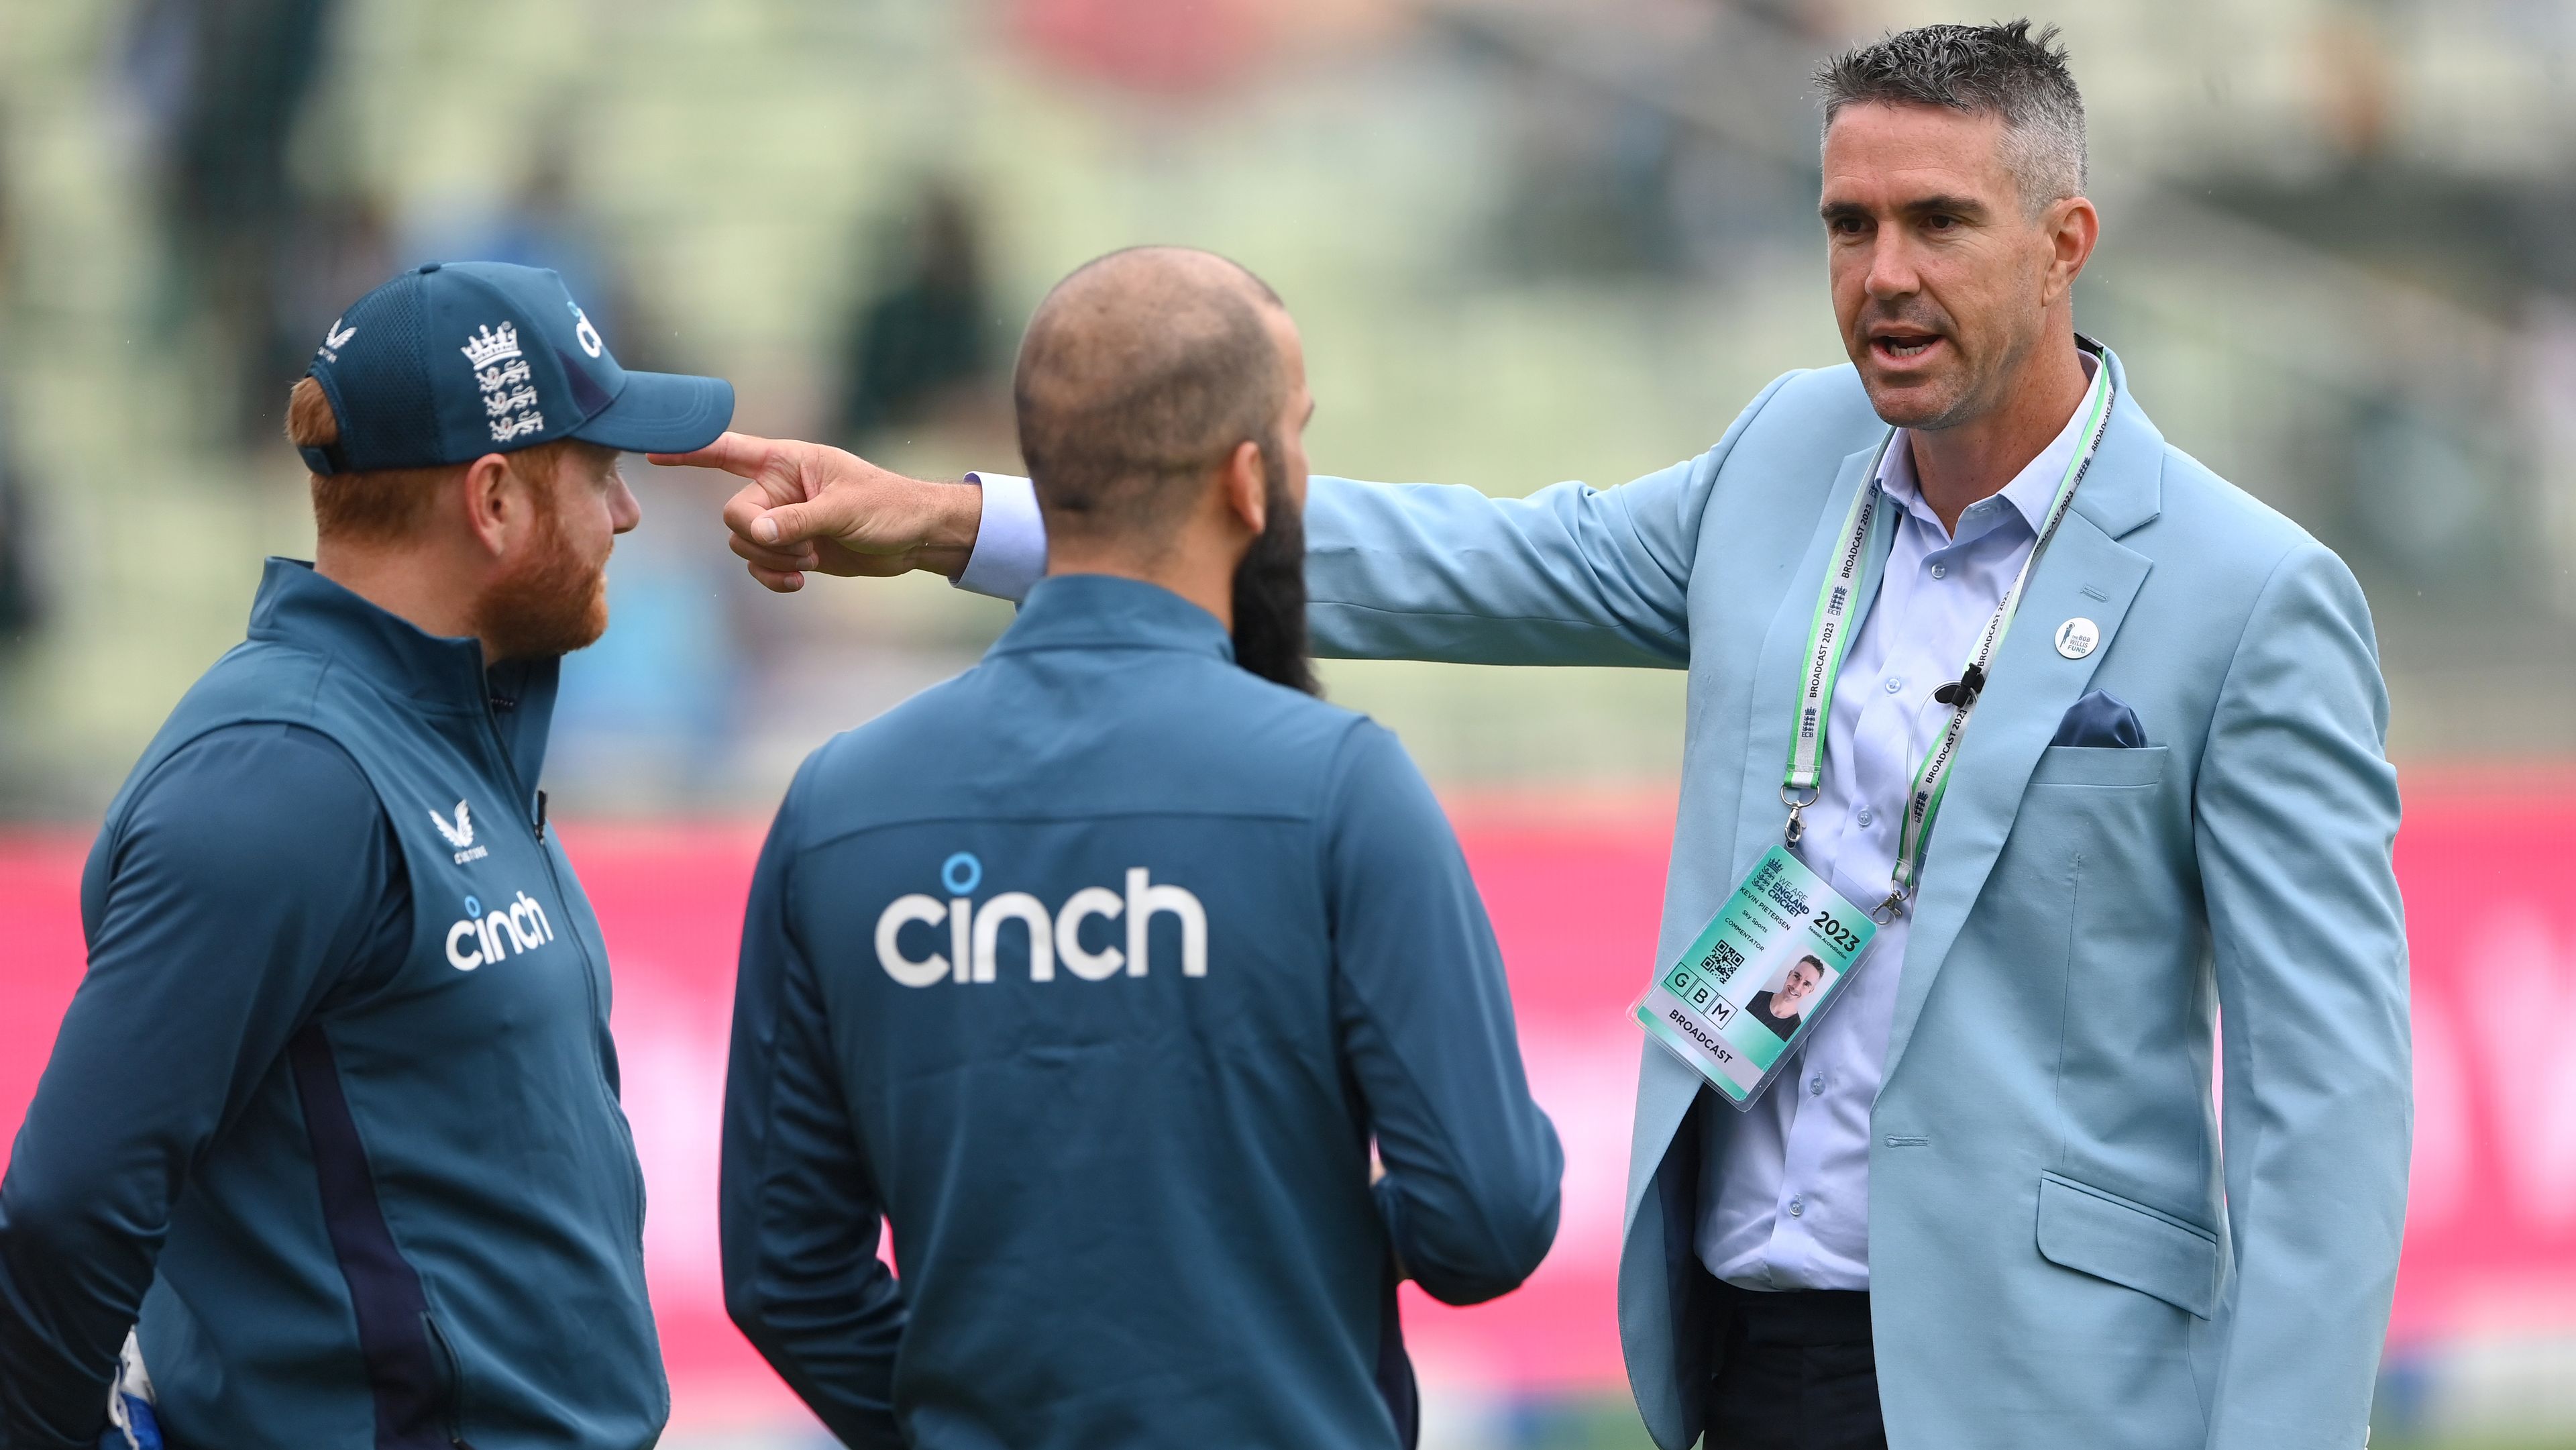 Kevin Pietersen chats to Moeen Ali and Jonny Bairstow of England.